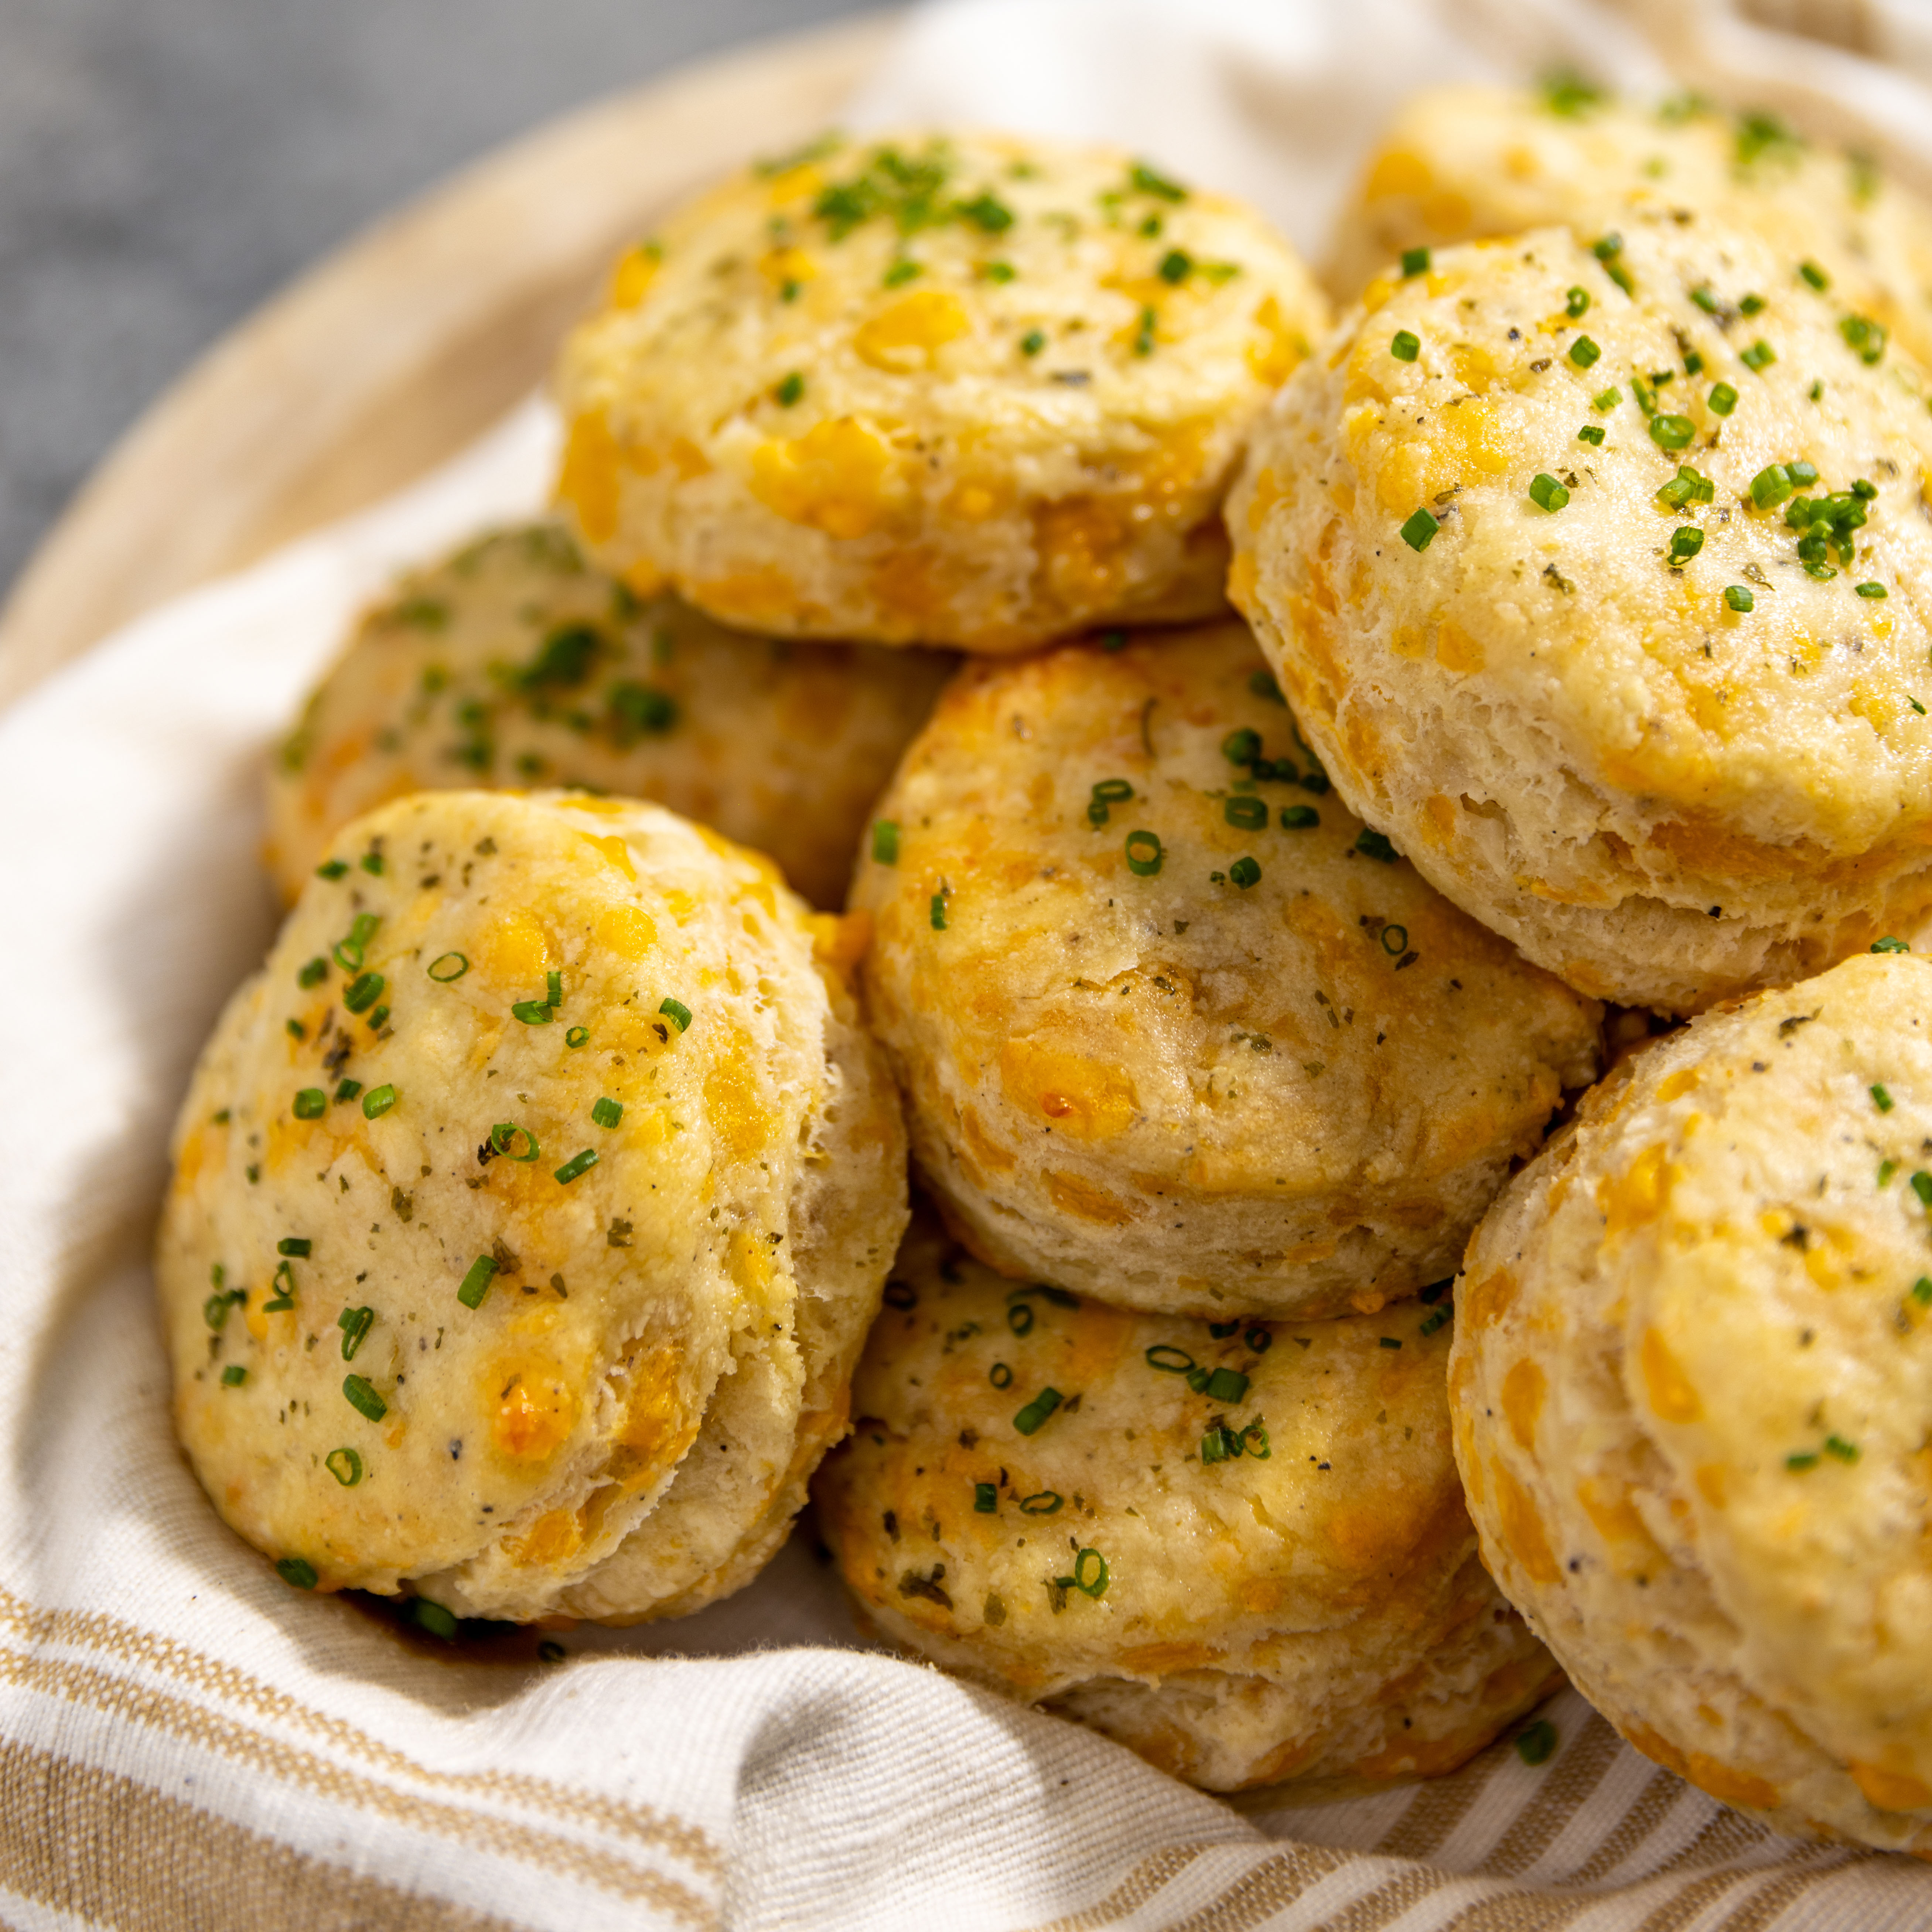 Joanna Gaines' Cheddar Biscuits